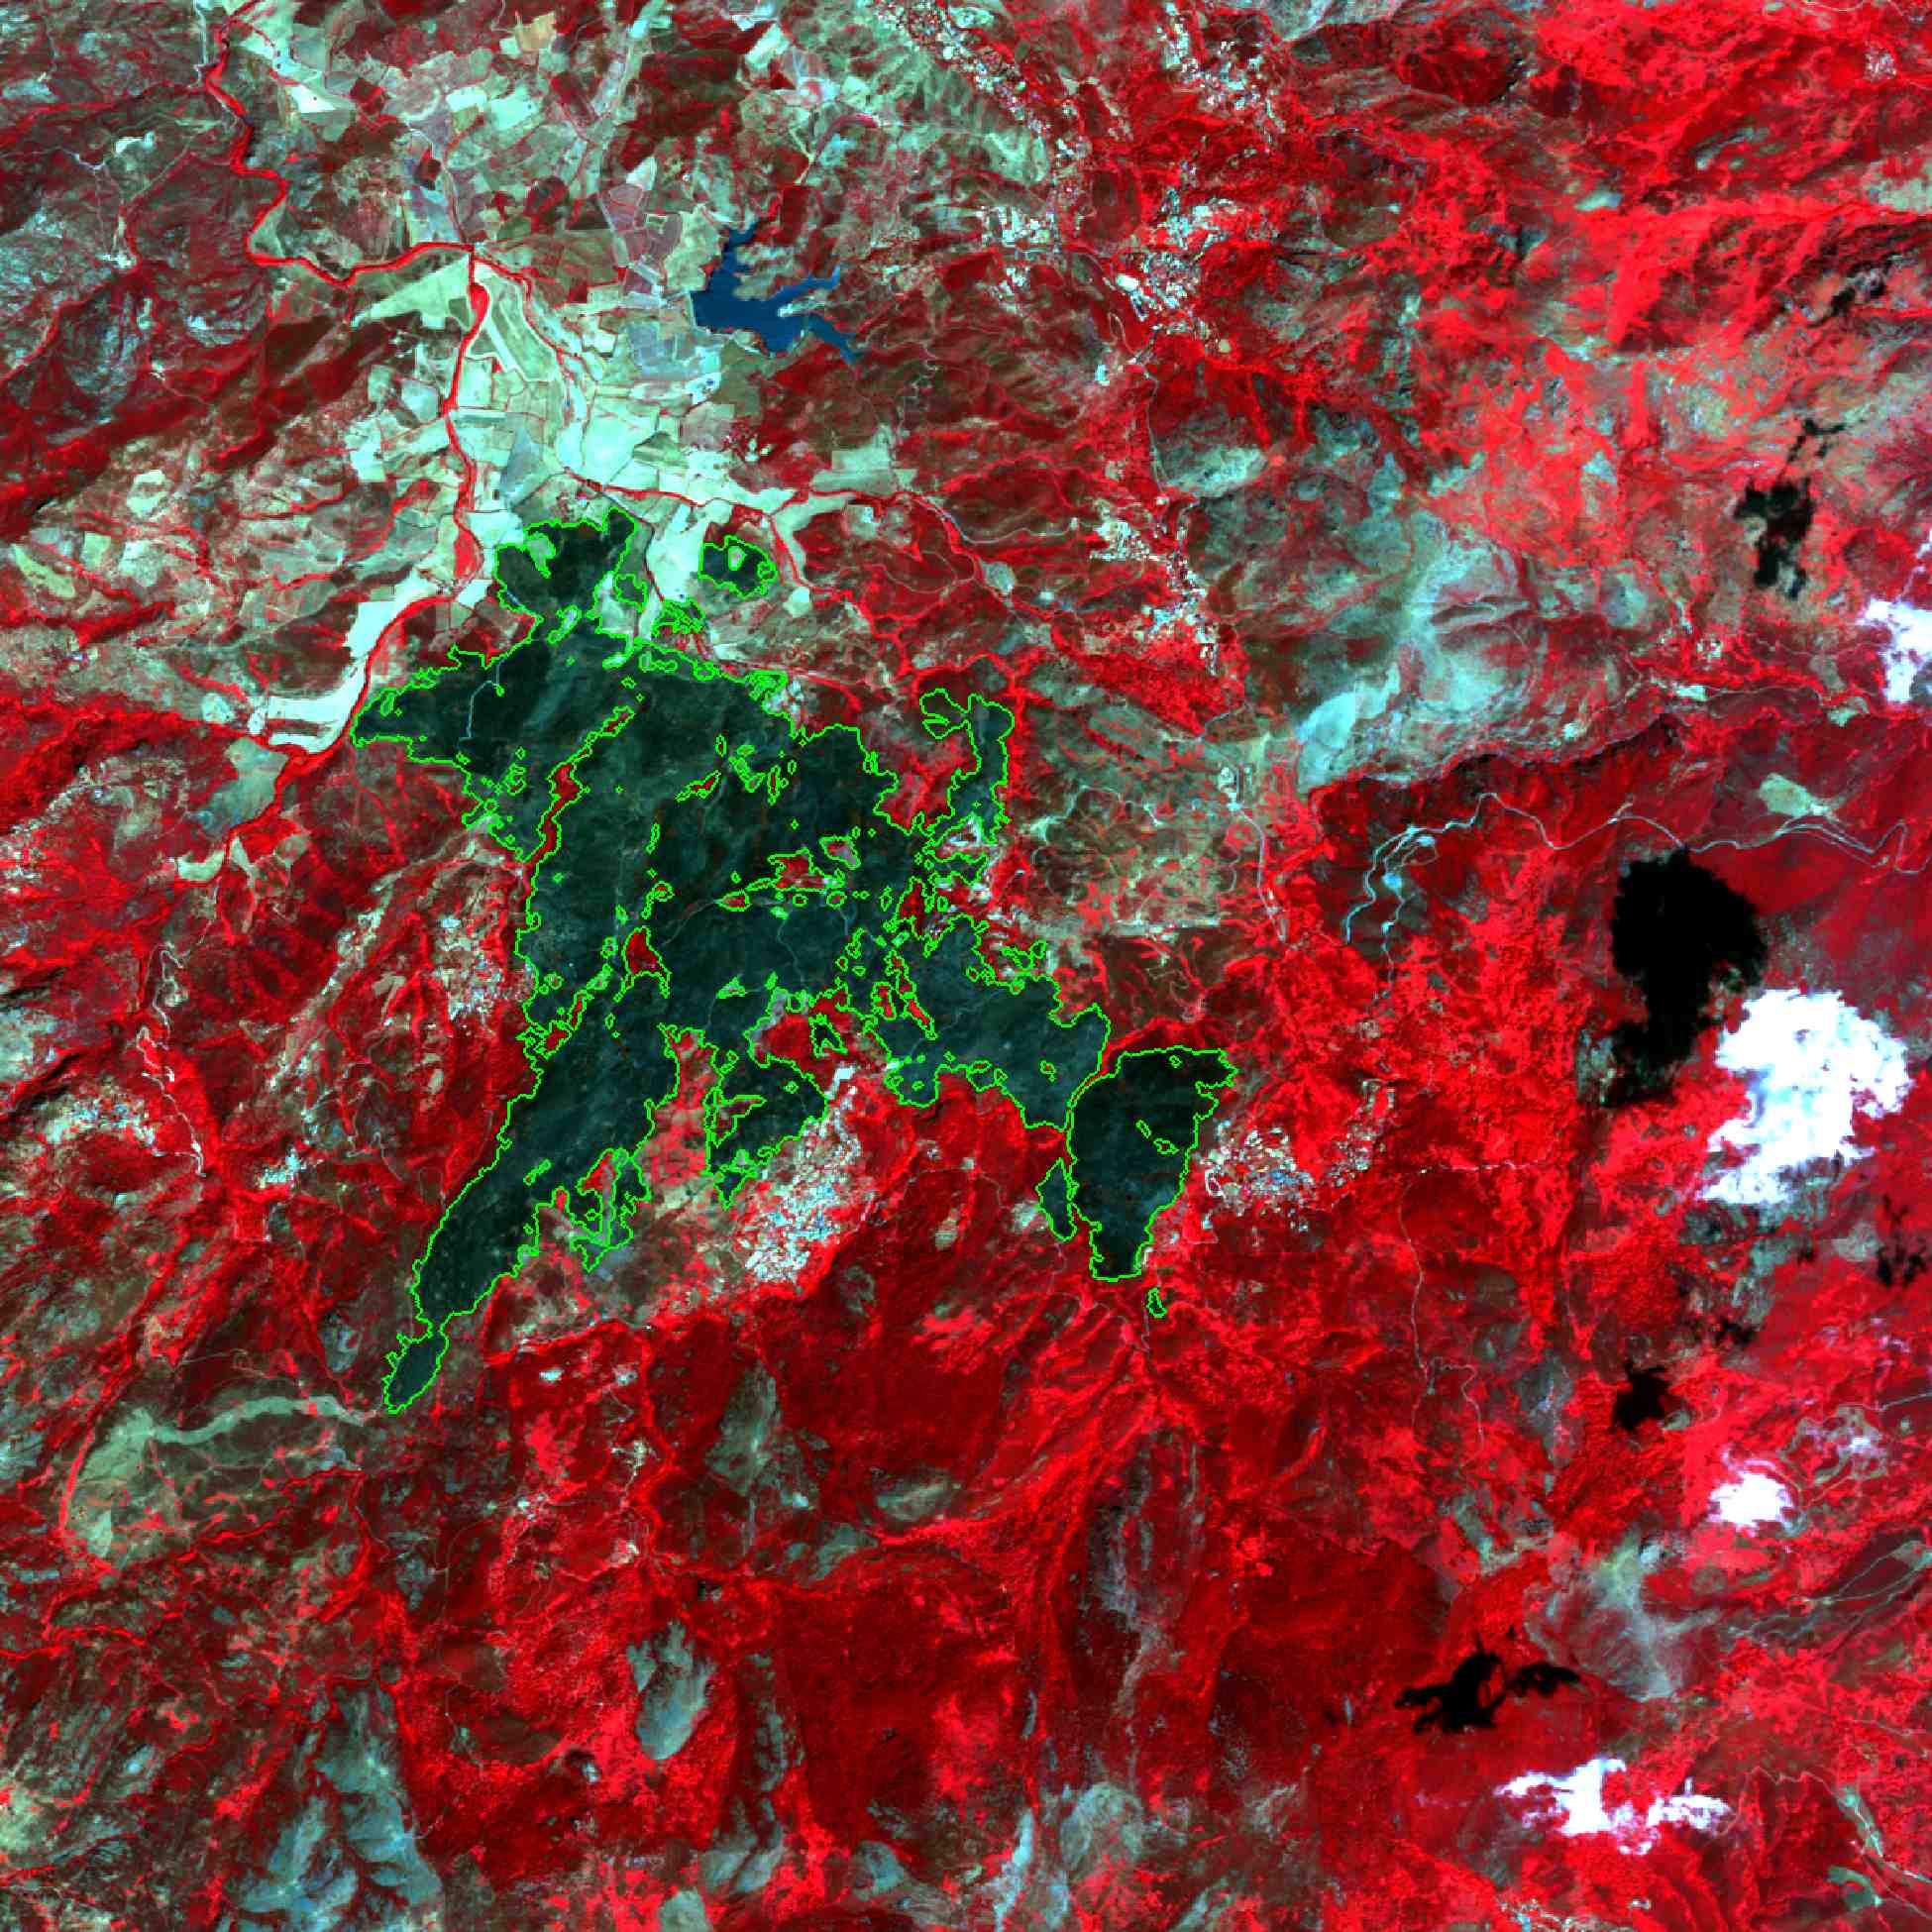 Burnt area detection after a forest fire in 2005 in Corsica, France (about 1000 hectares) SPOT 5 Image å© CNES 2005, Distribution SPOT Image. Extracted boundaries å© INRIA Sophia Antipolis - ARIANA